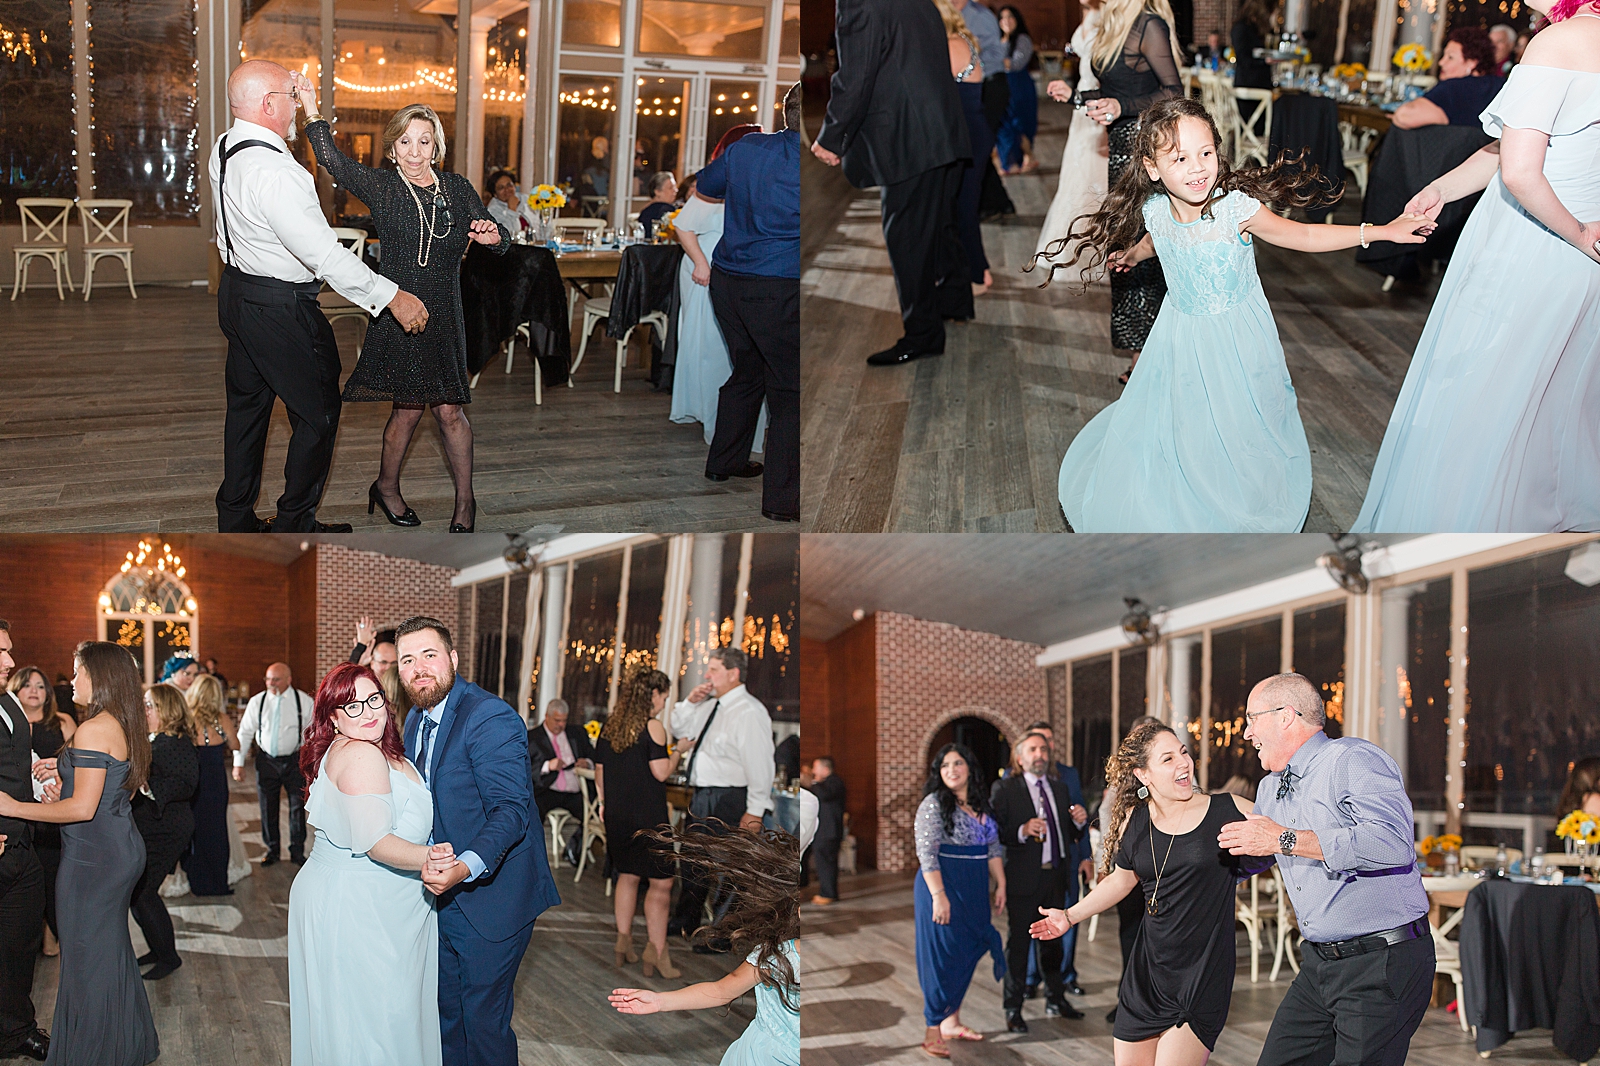 Mooresville Wedding Reception at Johnson Carriage House Guests Dancing Photos